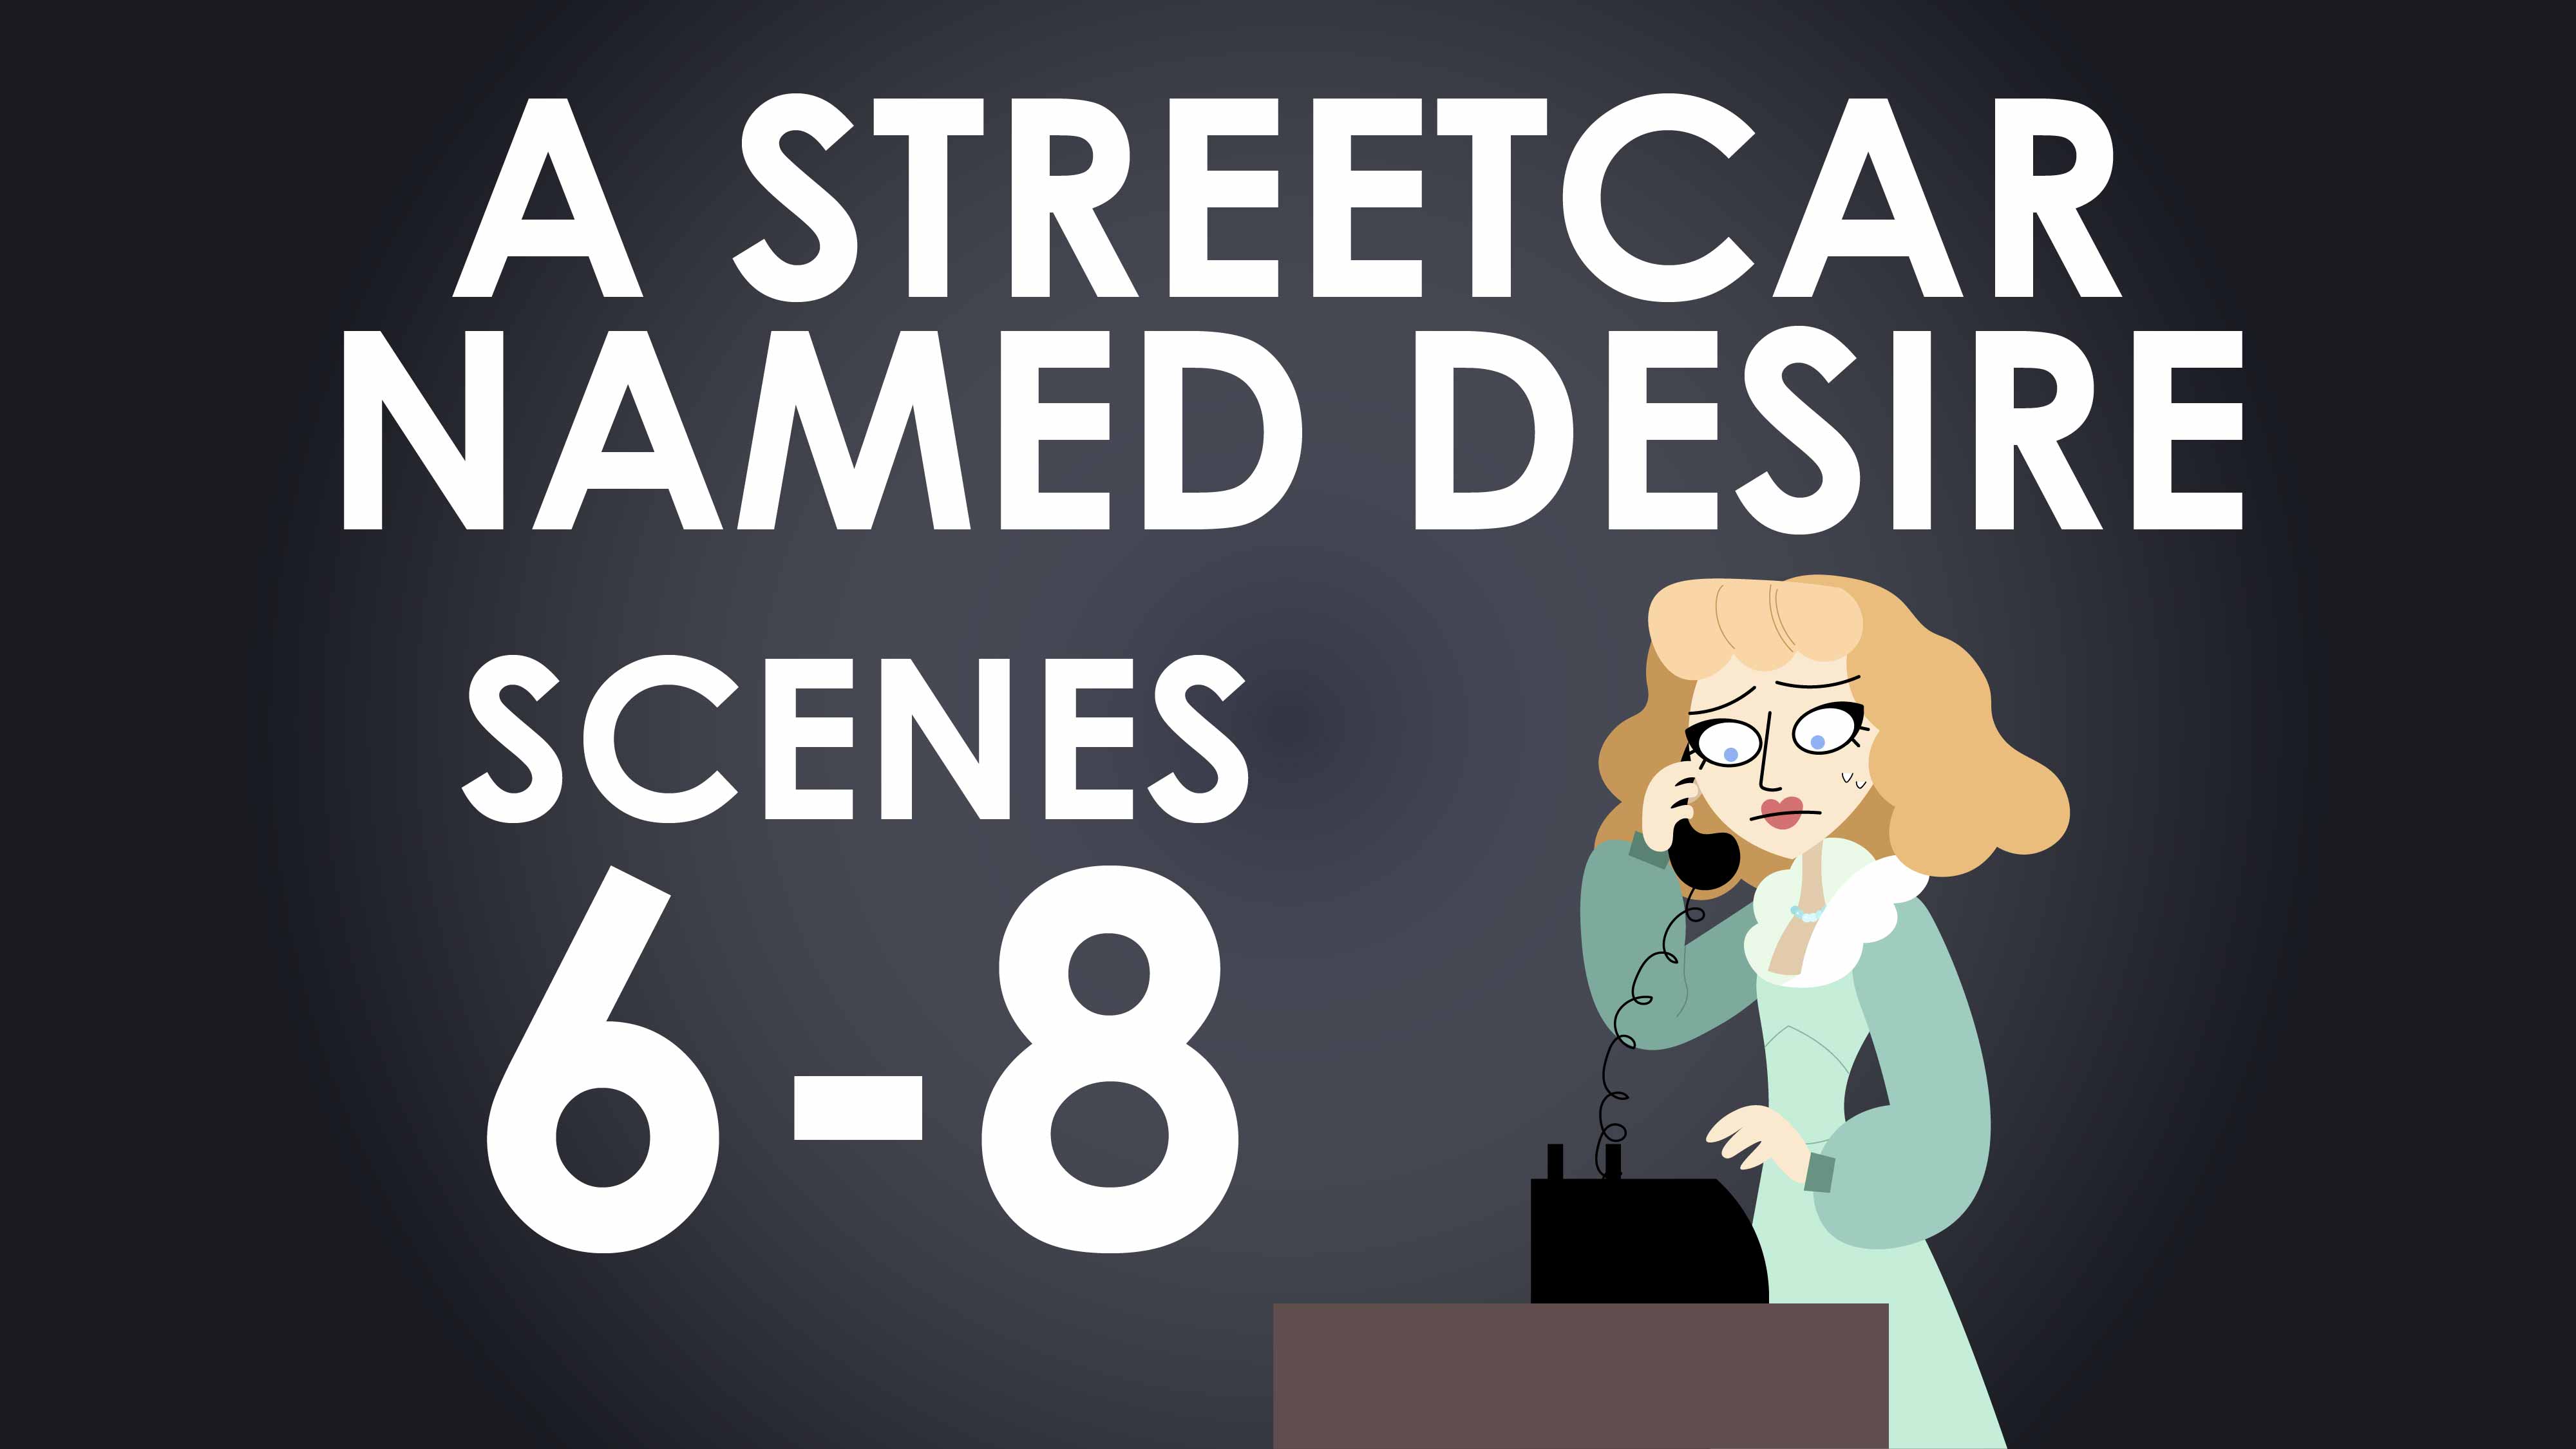 A Streetcar Named Desire - Tennessee Williams - Scenes 6-8 Summary - Destroying Drama Series	